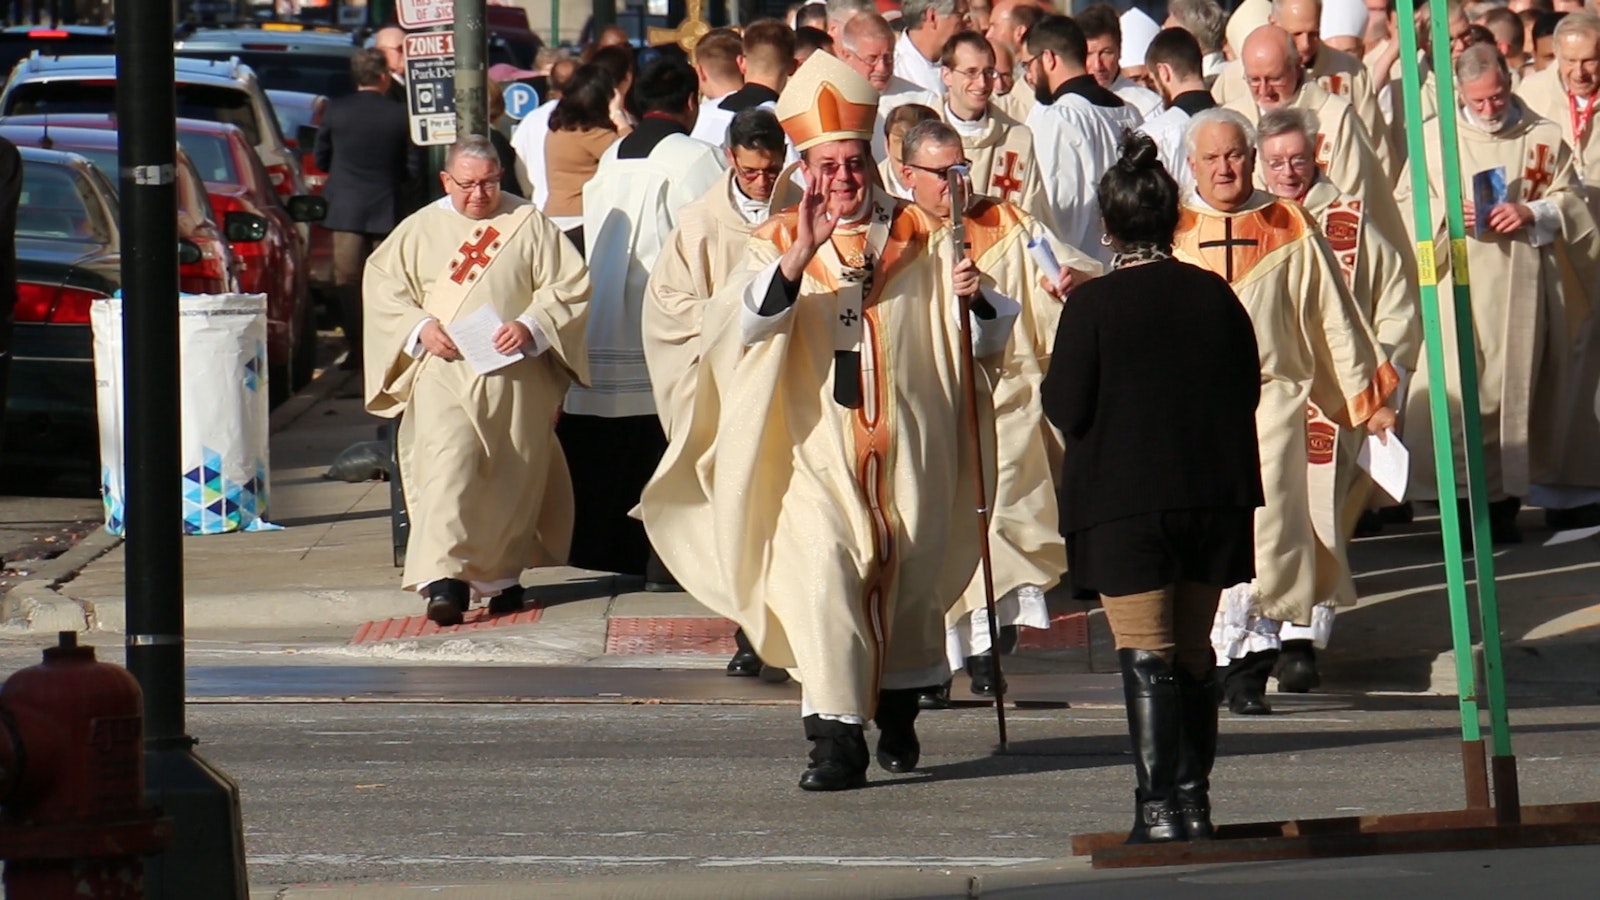 Archbishop Vigneron leads a joyful procession from St. Aloysius Parish in downtown Detroit to the Westin Book Cadillac hotel for the opening of Synod 16 on Nov. 18, 2016. The Holy Spirit's movement during the three-day gathering has been the genesis and driving force of the Archdiocese of Detroit's missionary transformation, the archbishop says.